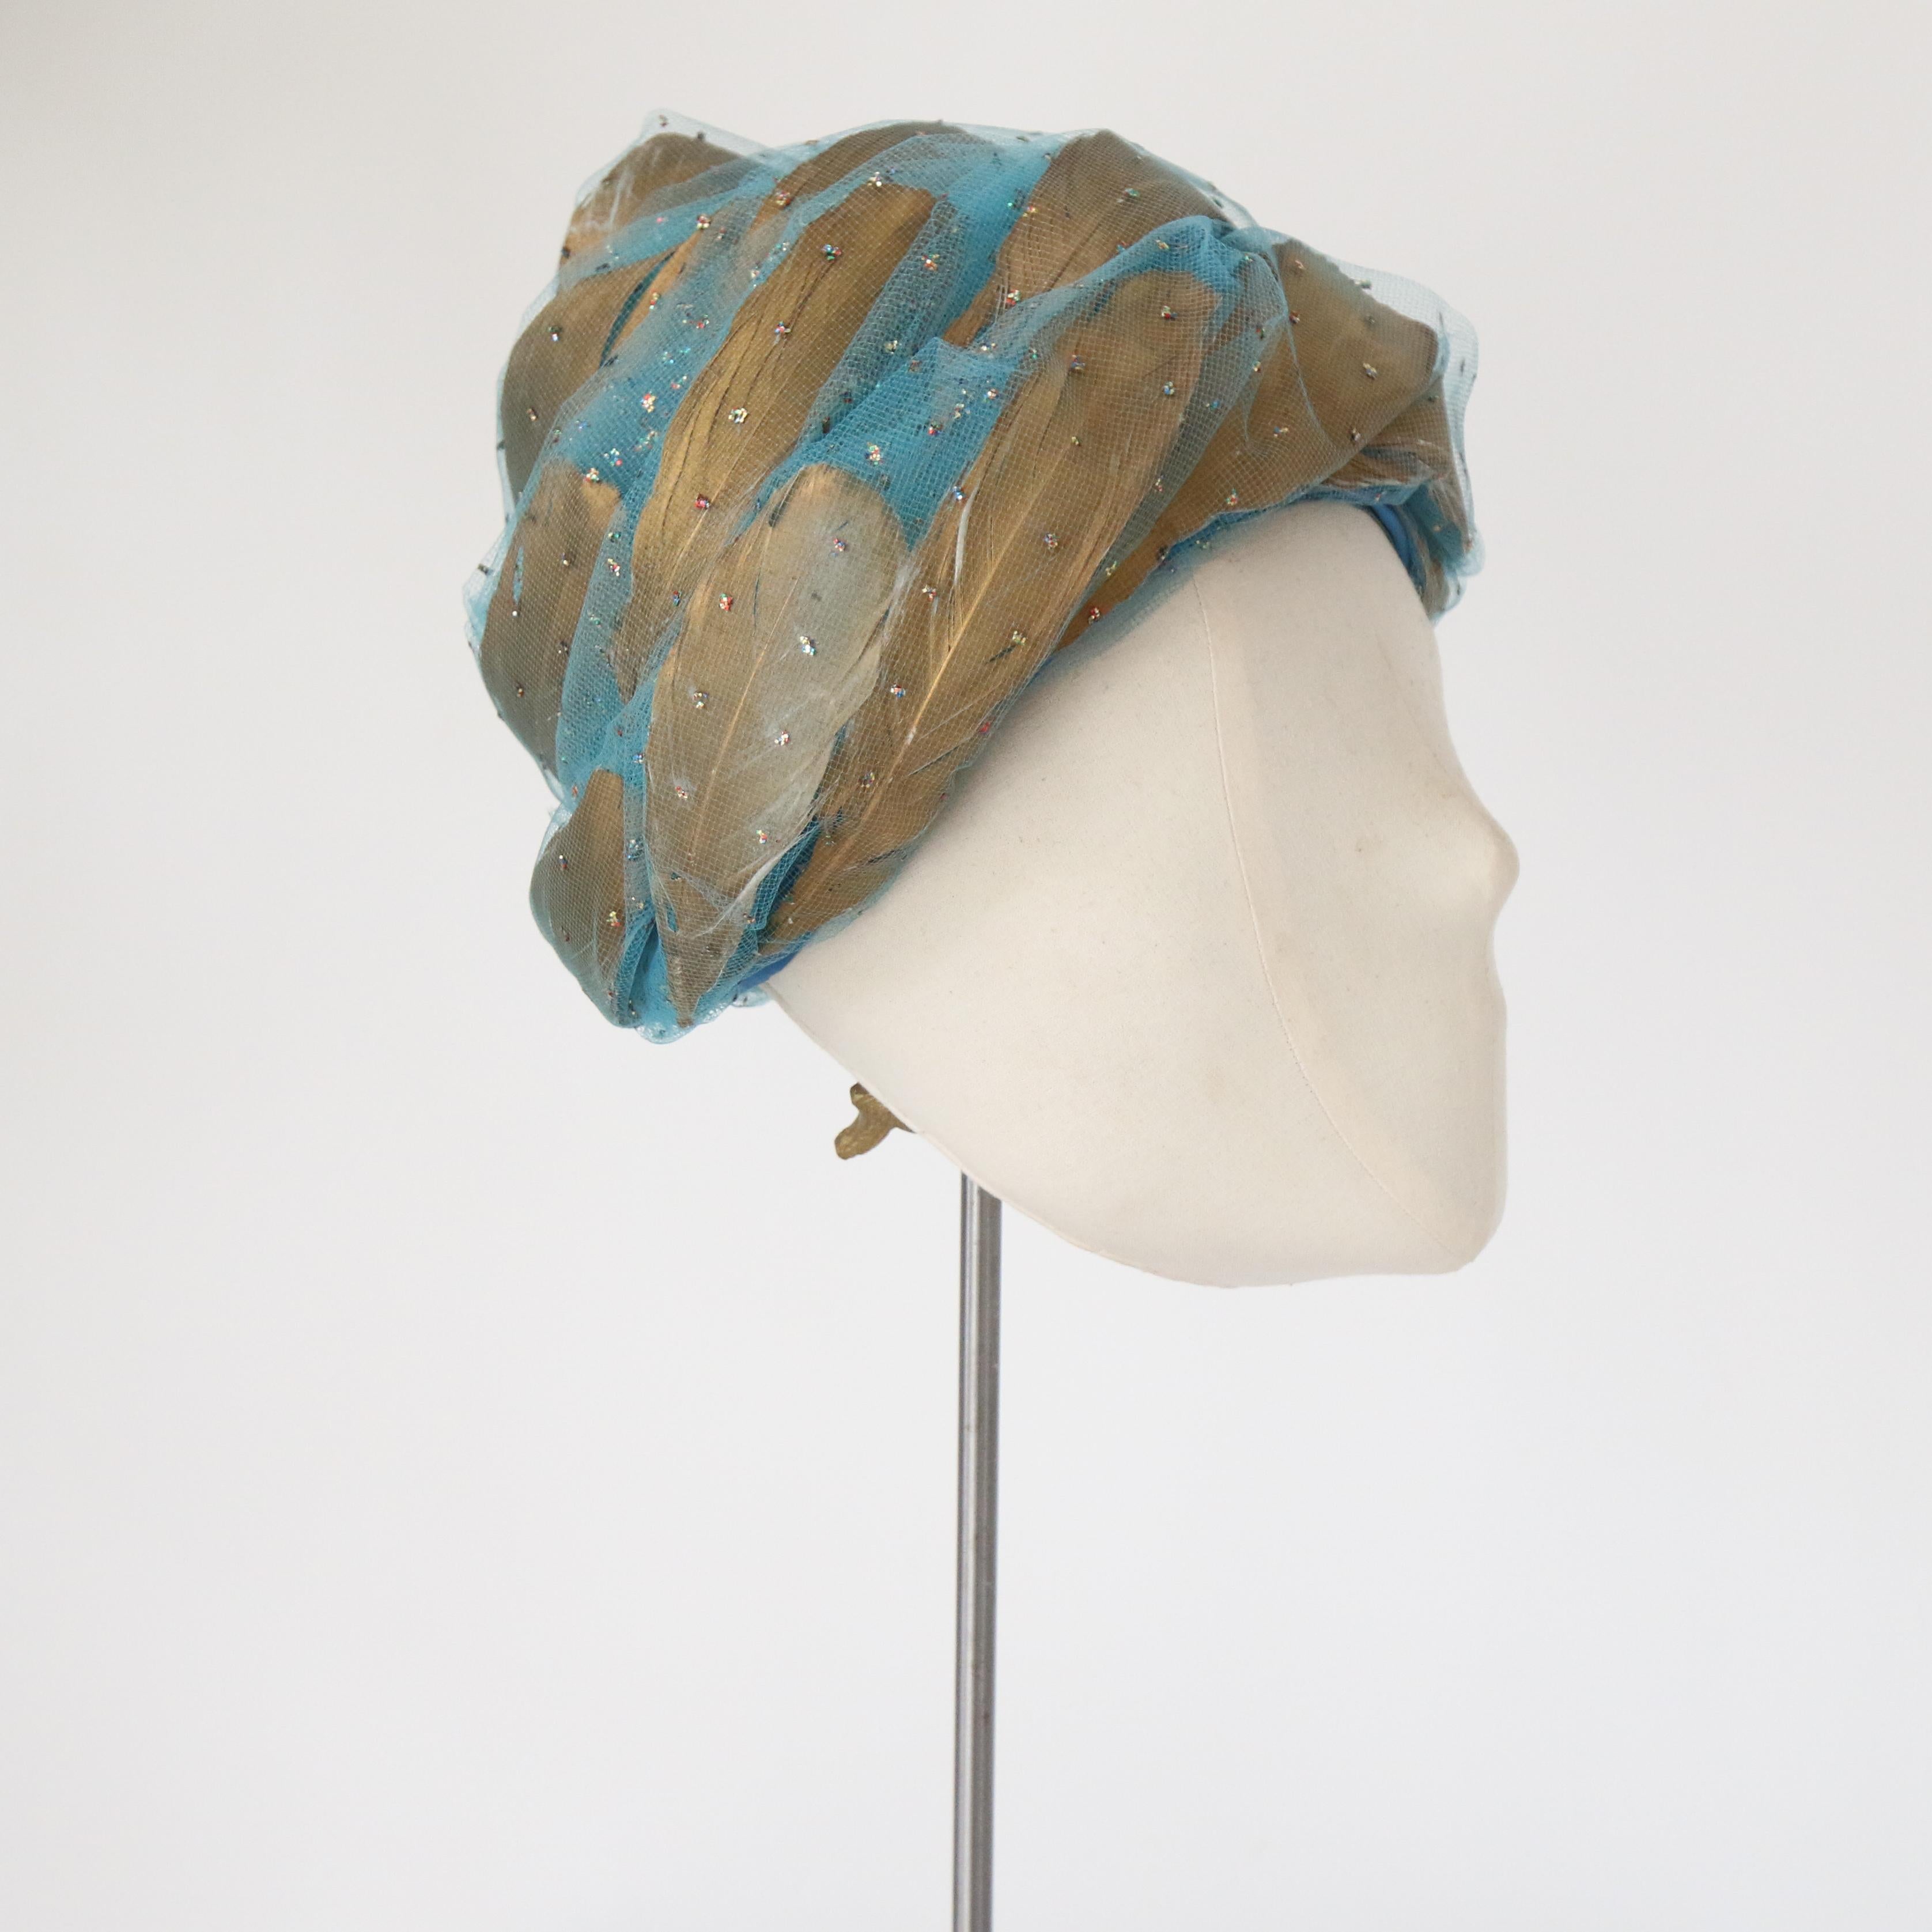 Vintage 1960's Christiain Dior Turquoise Tulle & Gold Turban Hat For Sale 3